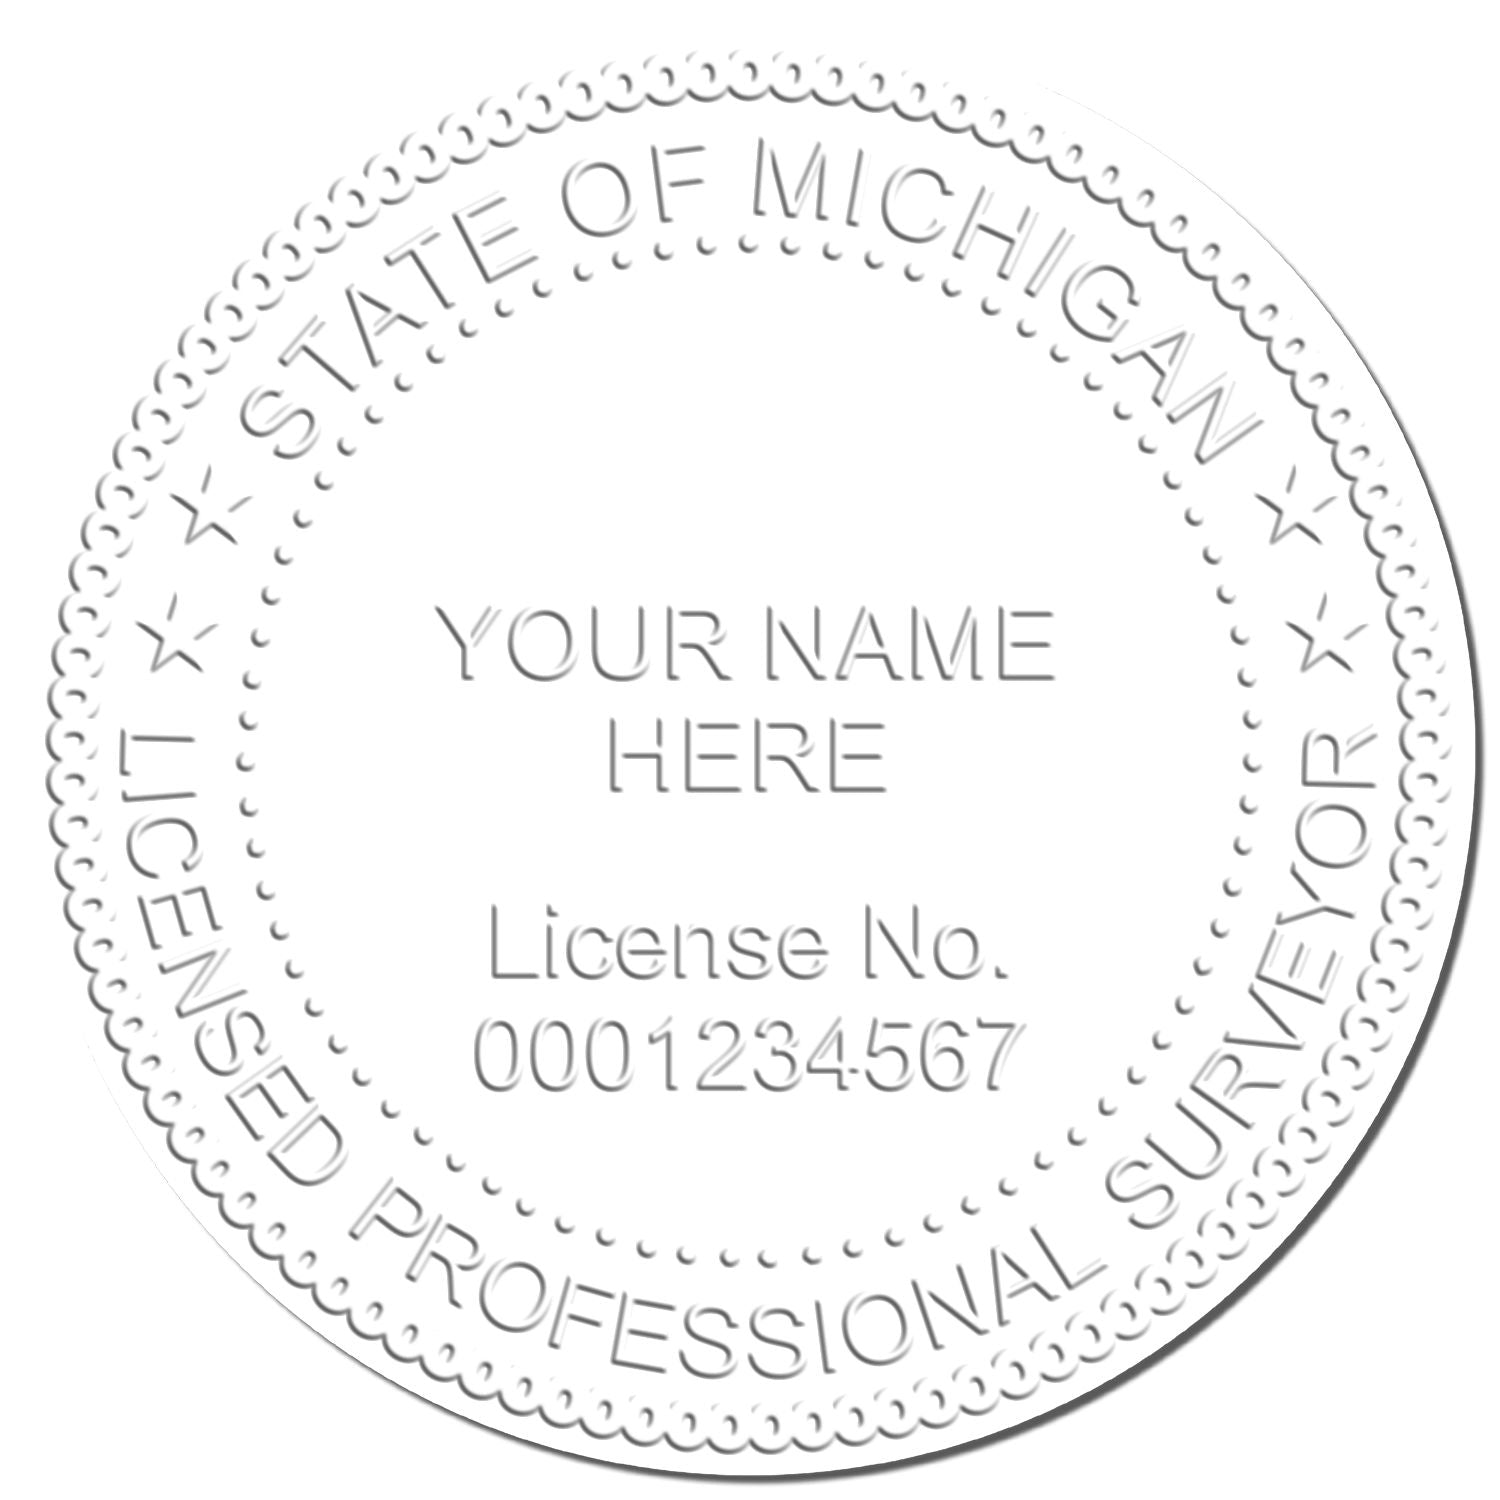 This paper is stamped with a sample imprint of the State of Michigan Soft Land Surveyor Embossing Seal, signifying its quality and reliability.